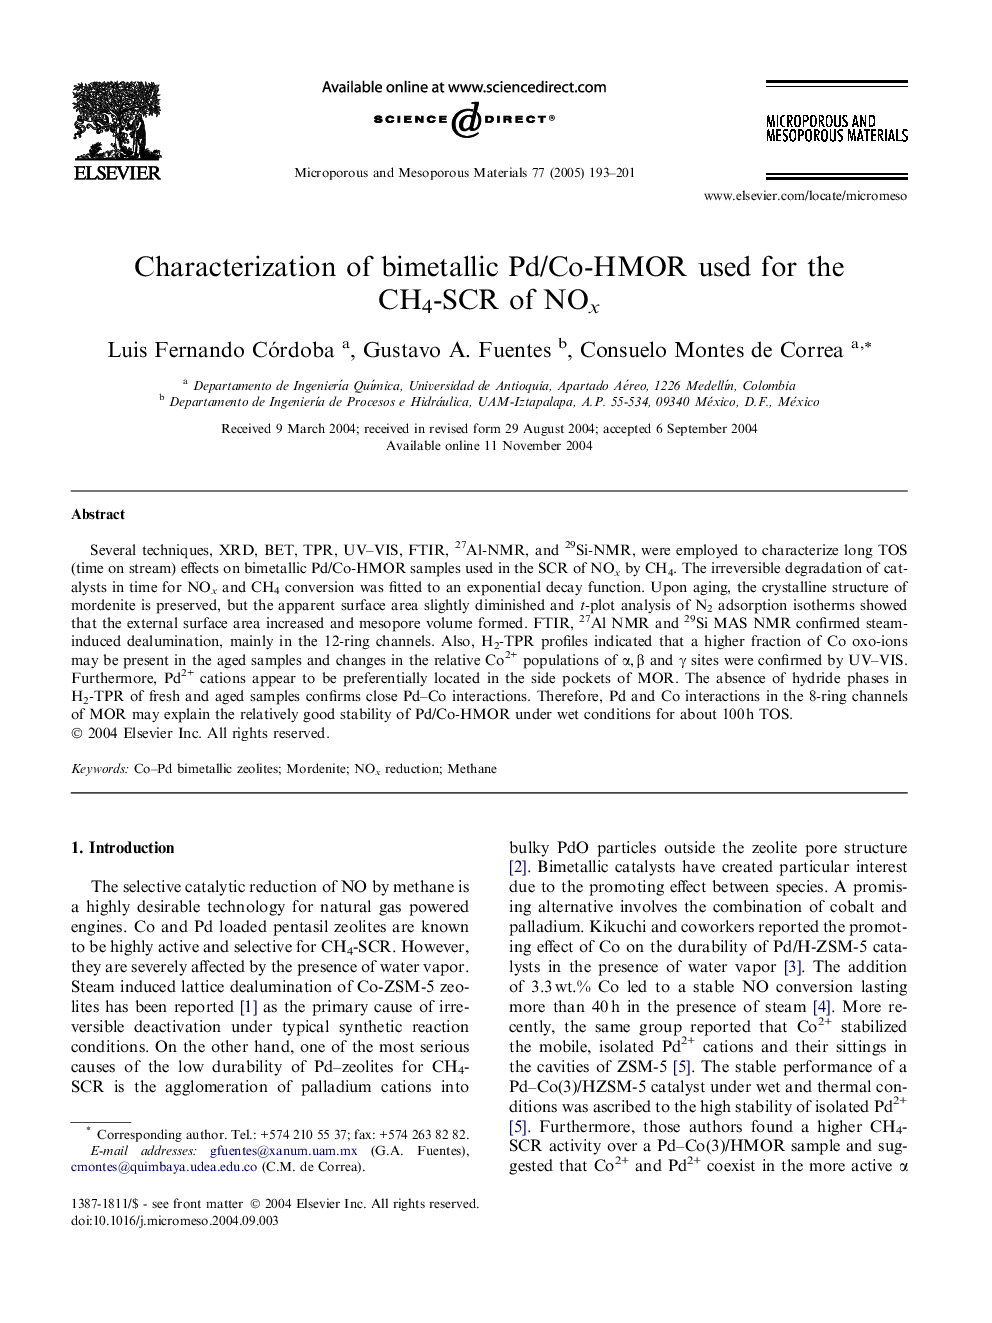 Characterization of bimetallic Pd/Co-HMOR used for the CH4-SCR of NOx